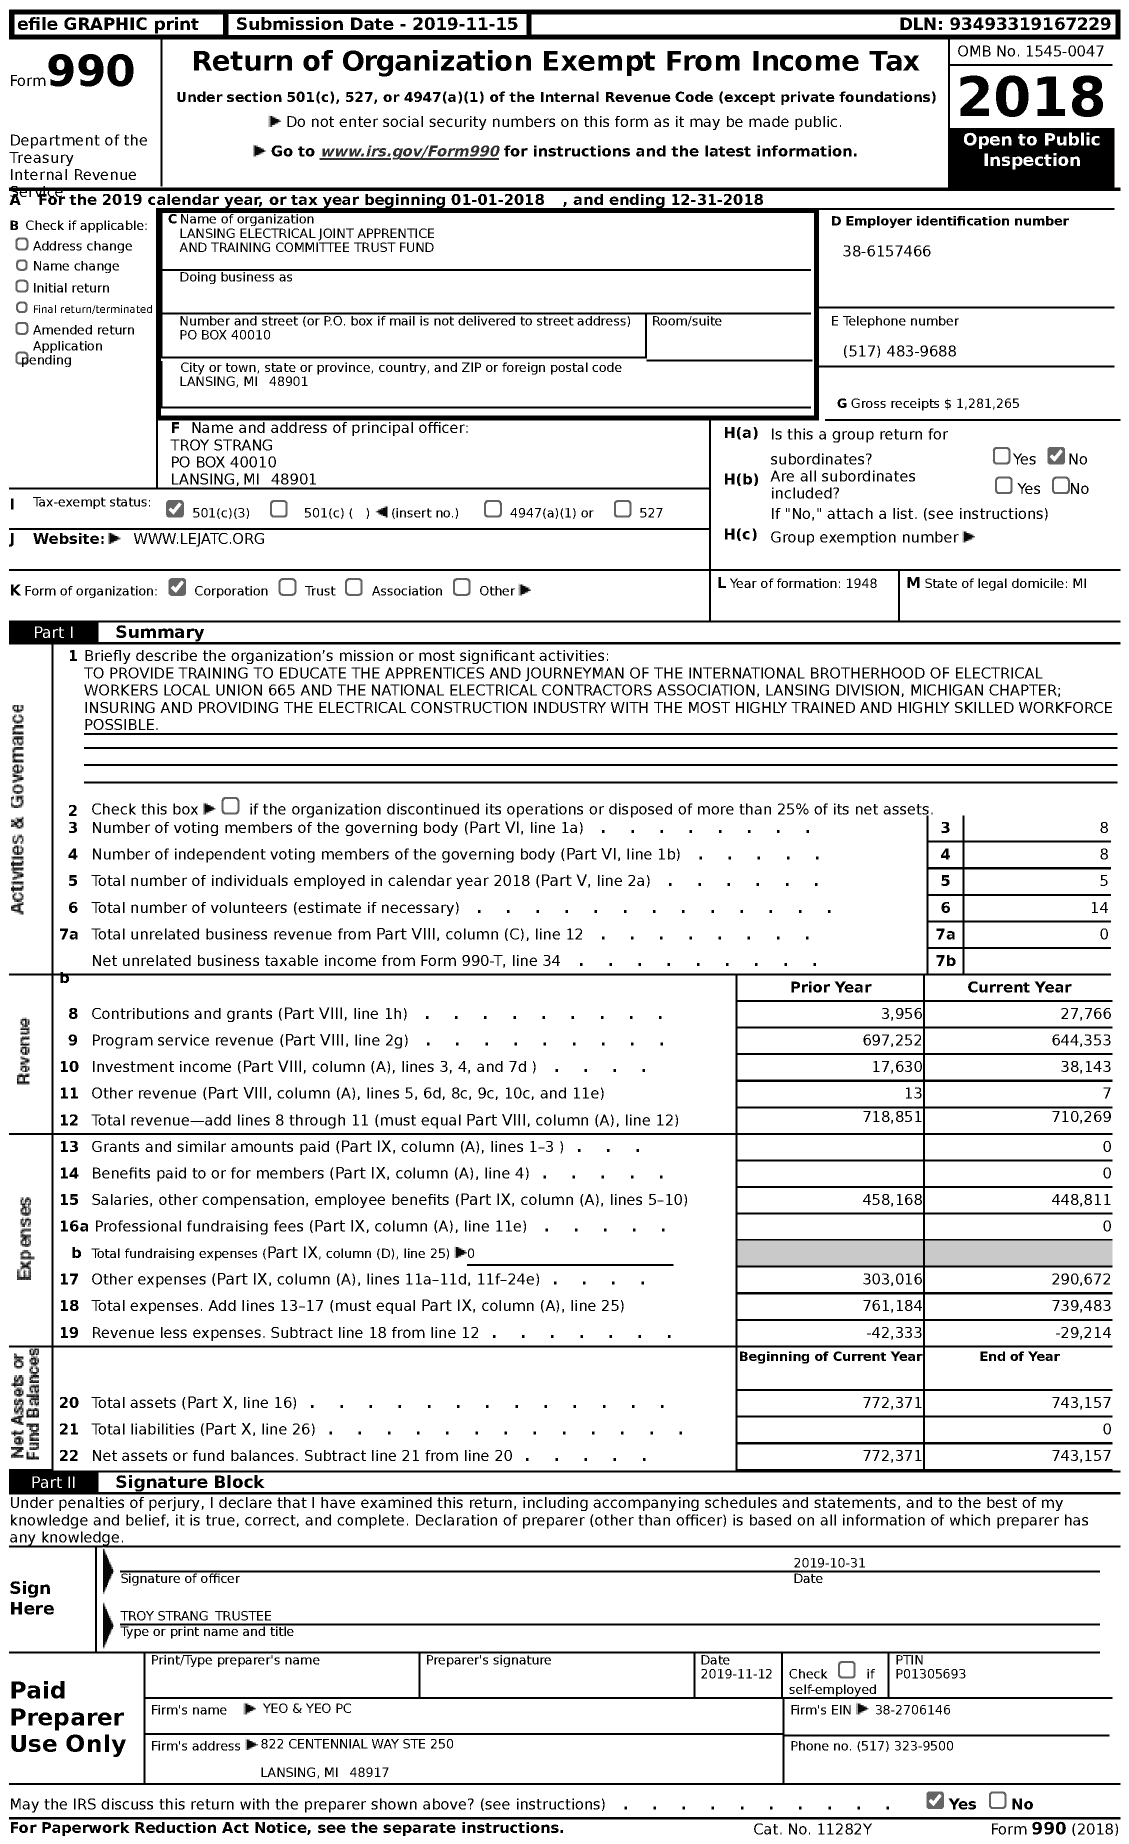 Image of first page of 2018 Form 990 for Lansing Electrical Joint Apprentice and Training Committee Trust Fund